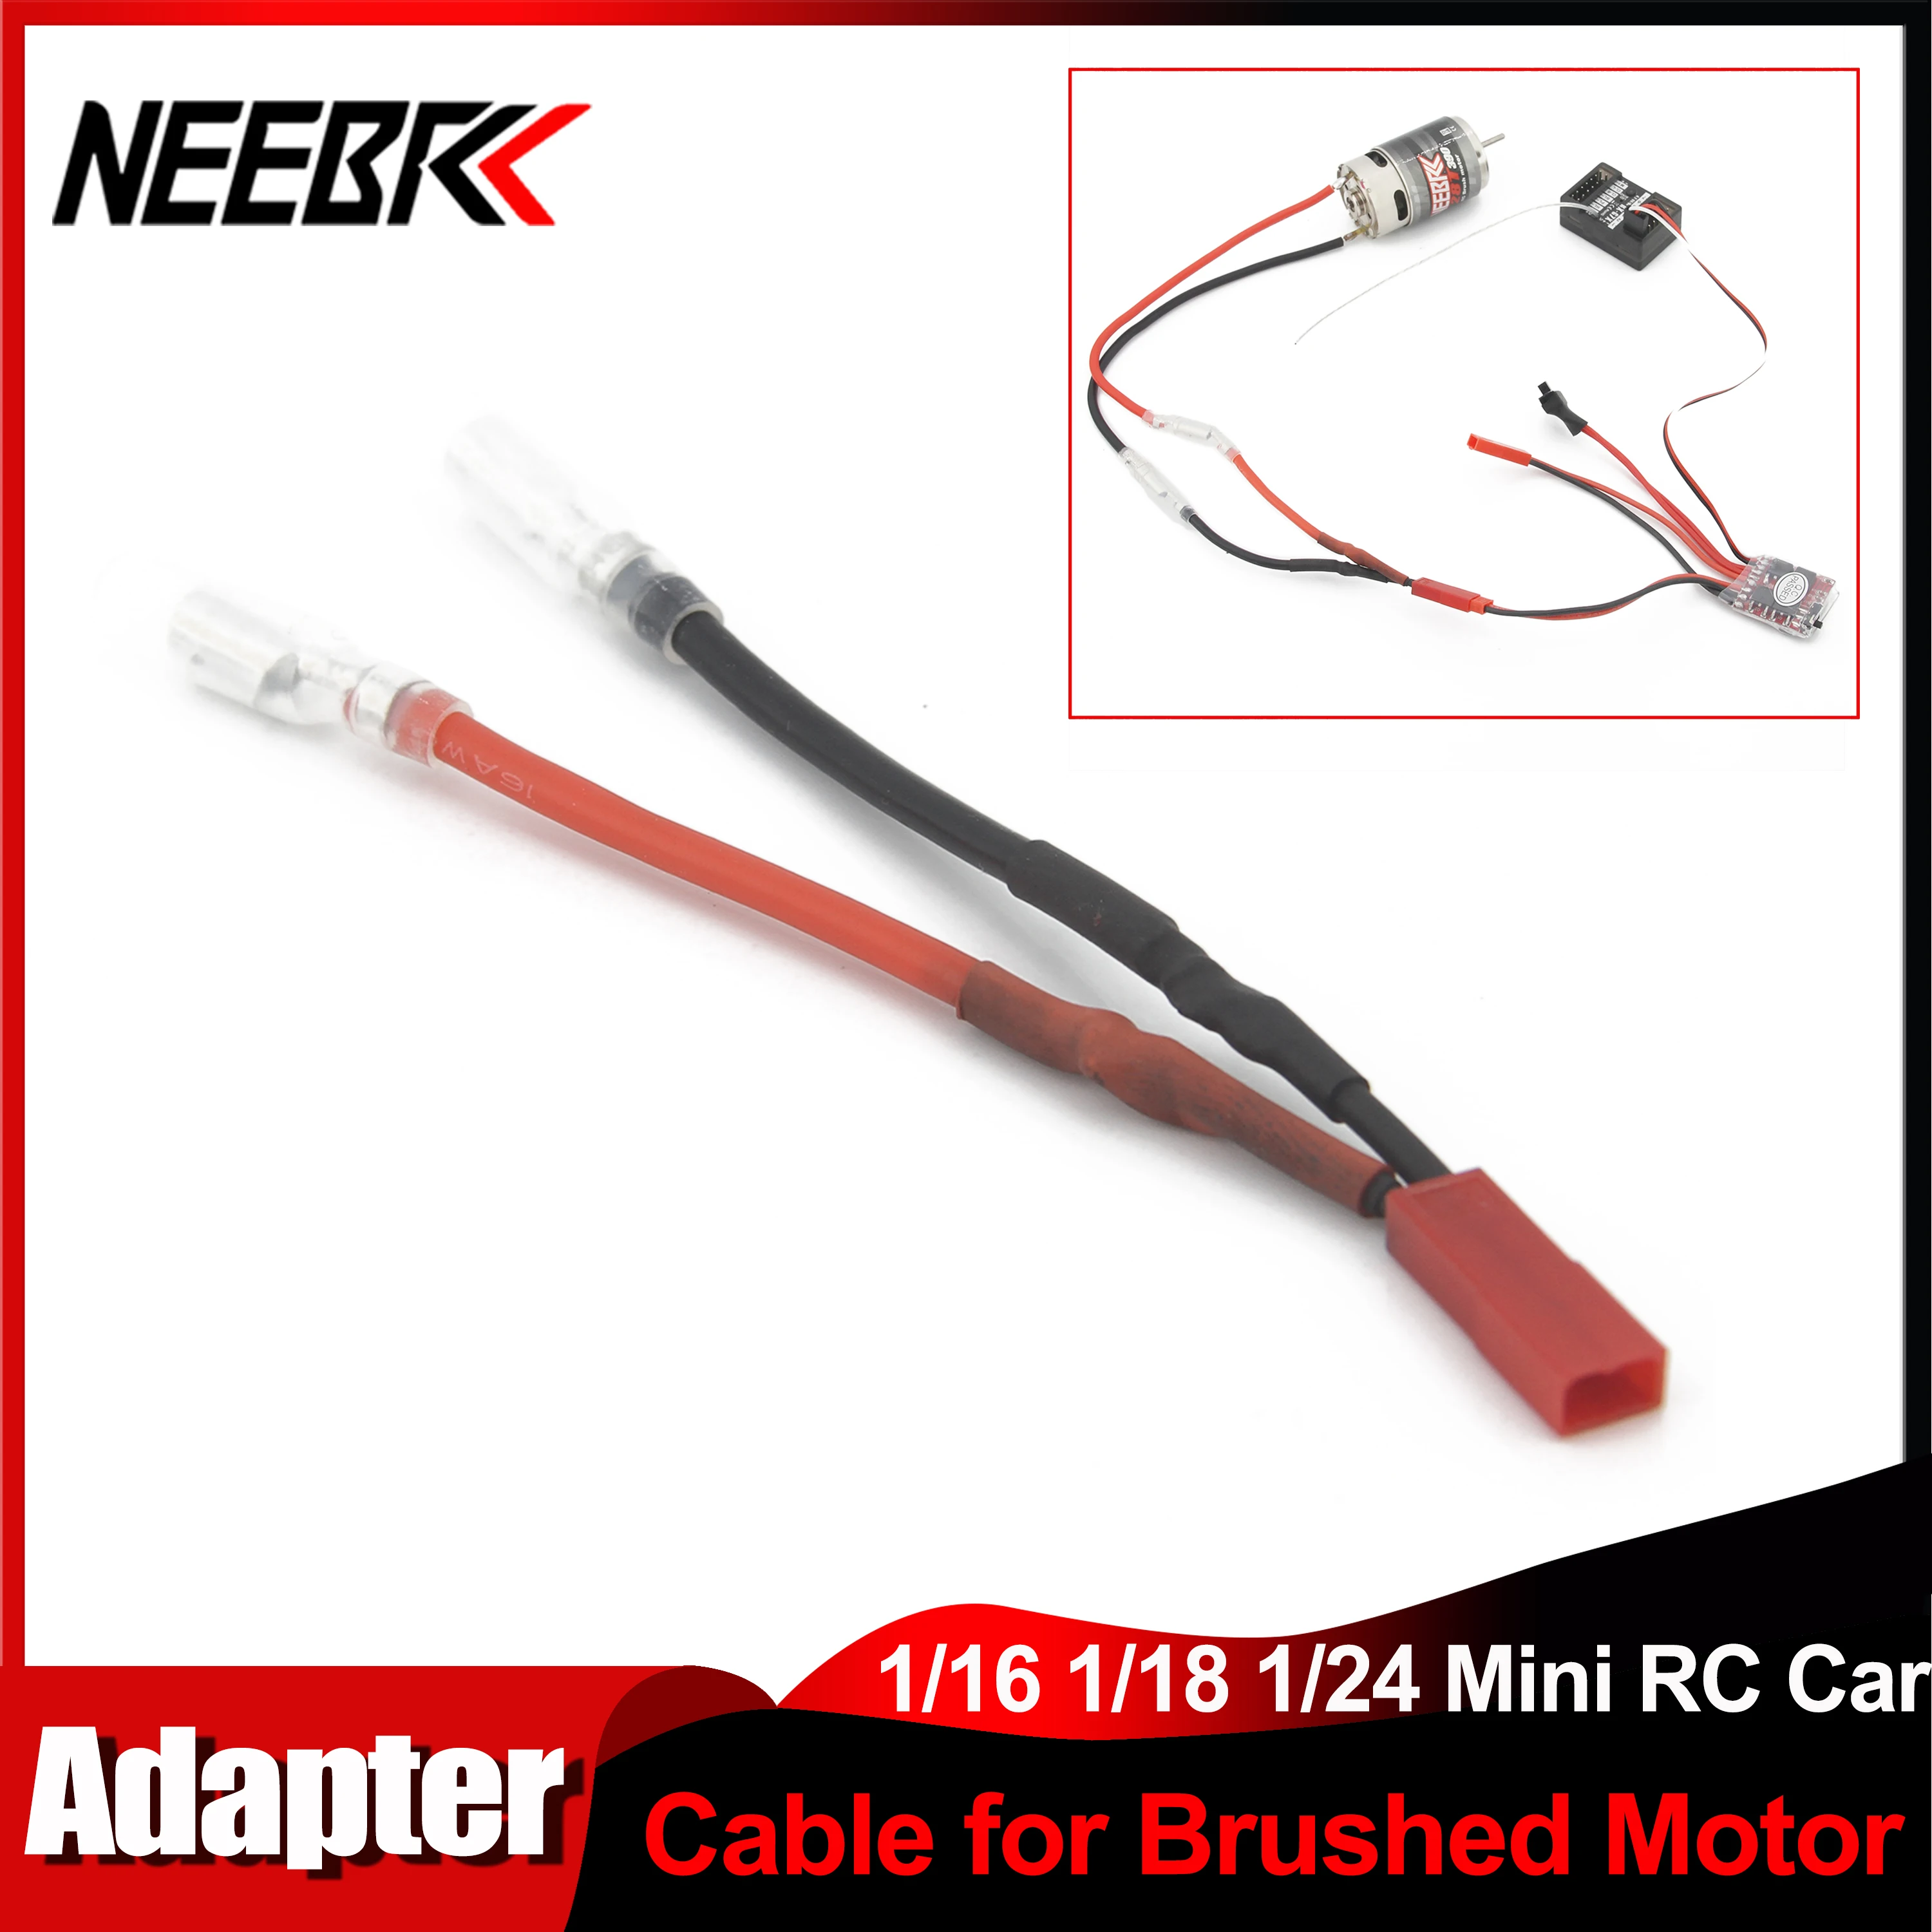 

1/3/10pcs NEEBRC 370 380 390 540 550 Motor Adapter Connection Cable ESC Plug Connector Bullet to JST for 1/16 1/18 1/24 RC Cars